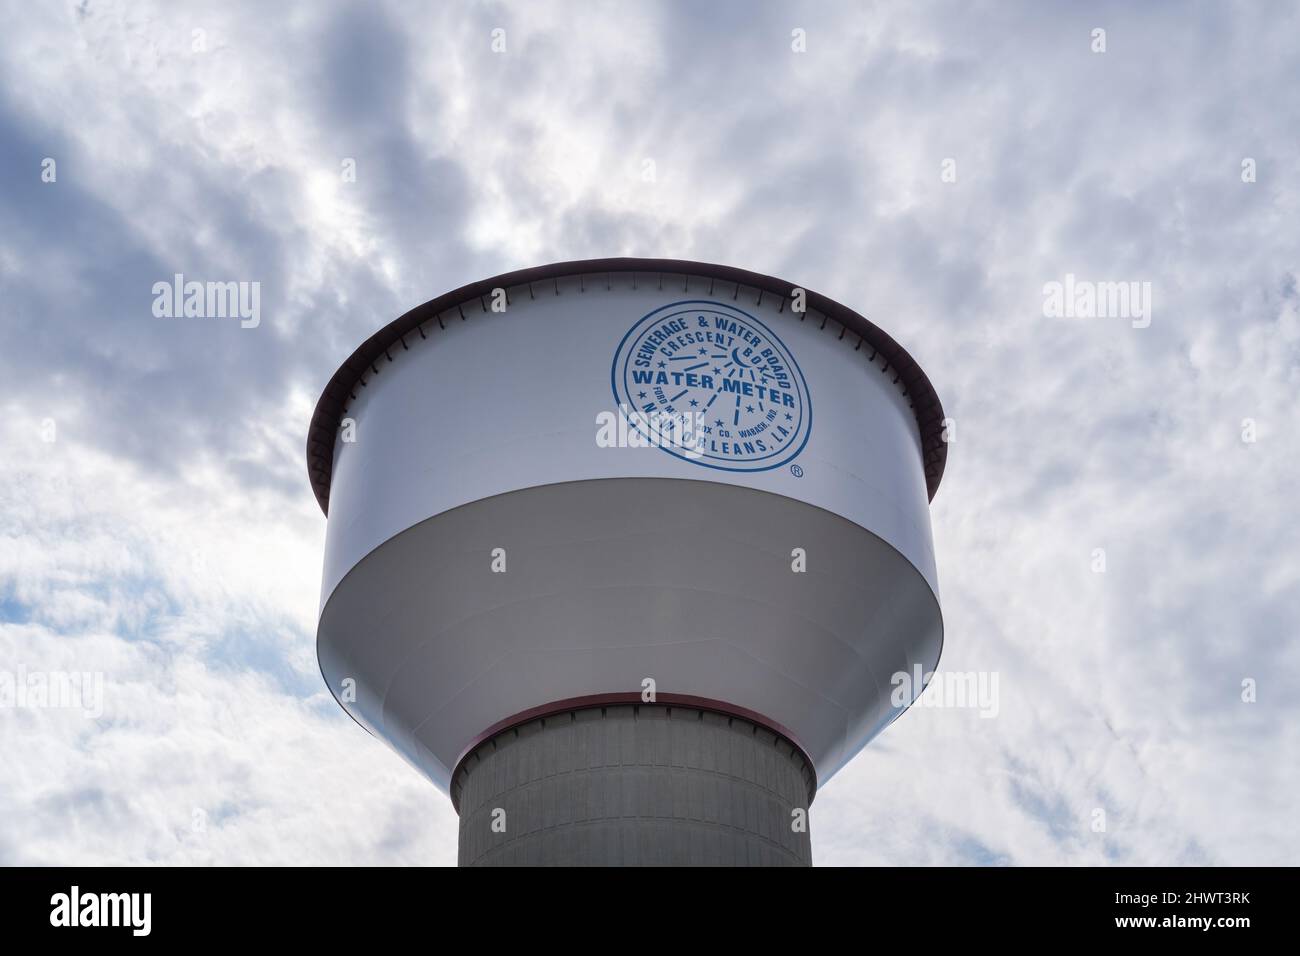 NEW ORLEANS, LA, USA - MARCH 3, 2022: Top of New Orleans Sewerage and Water Board water tower with cloudy sky in the background Stock Photo